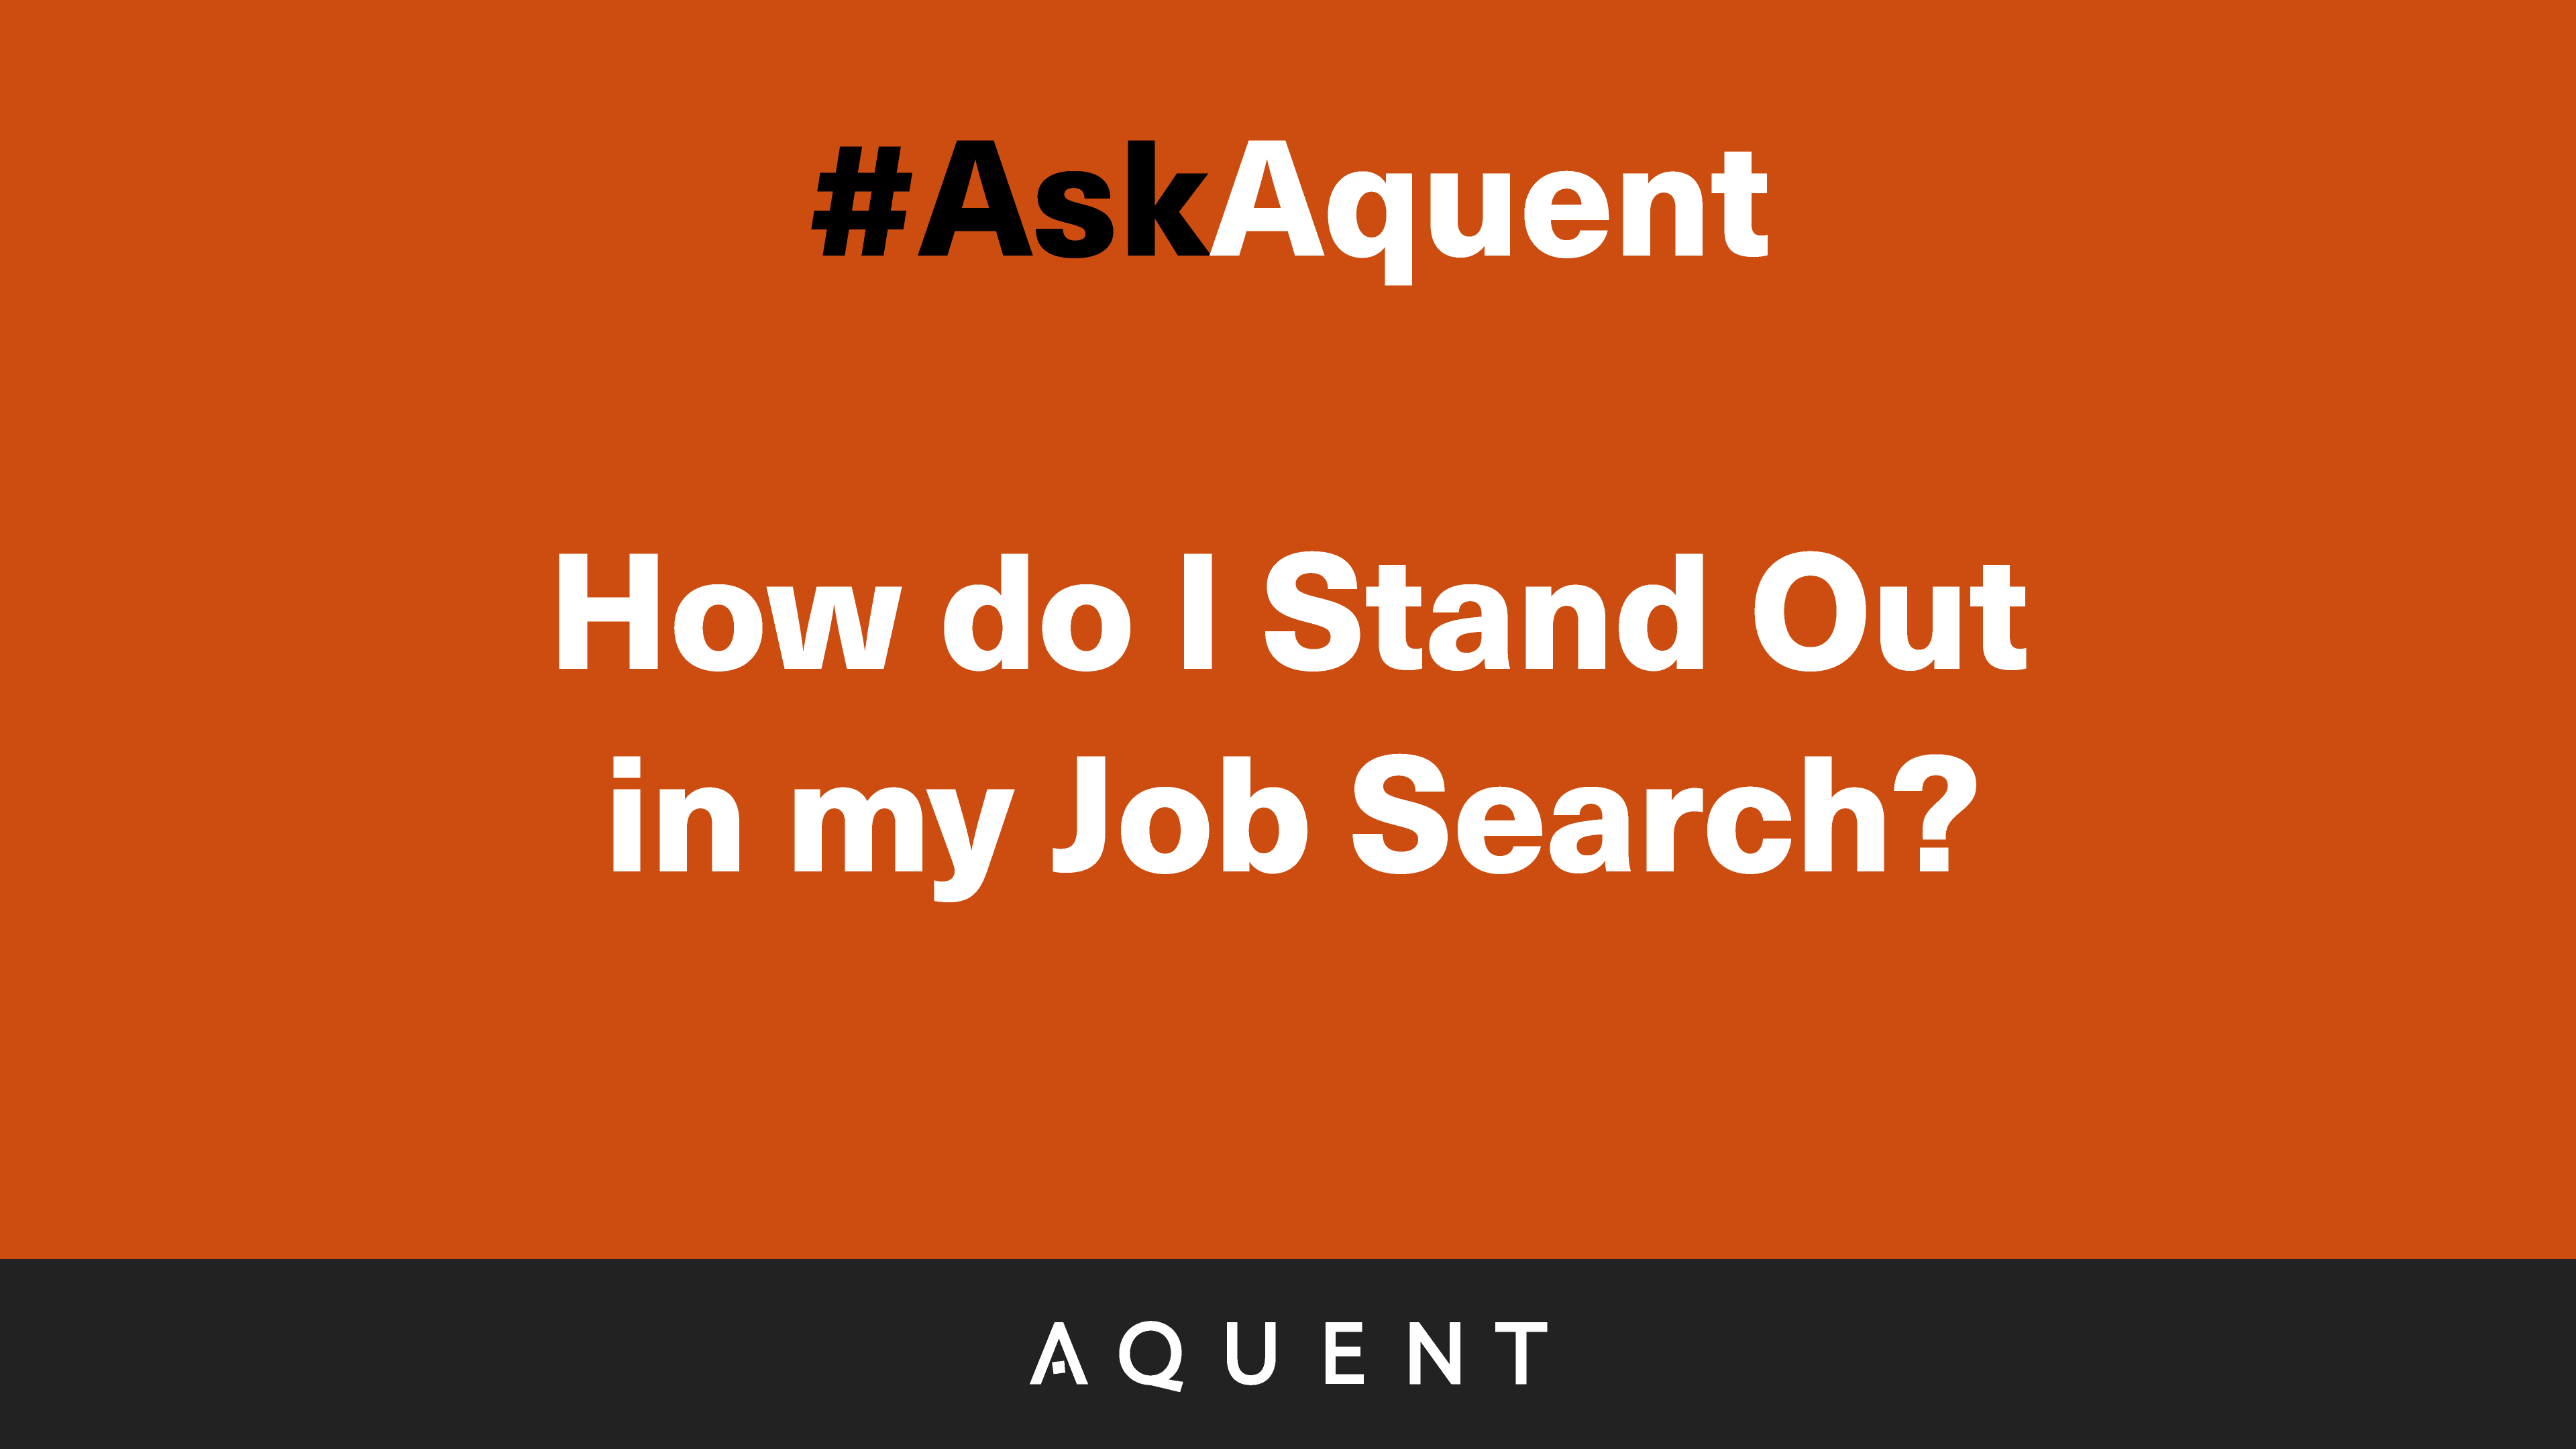 #AskAquent How do I stand out in my job search?